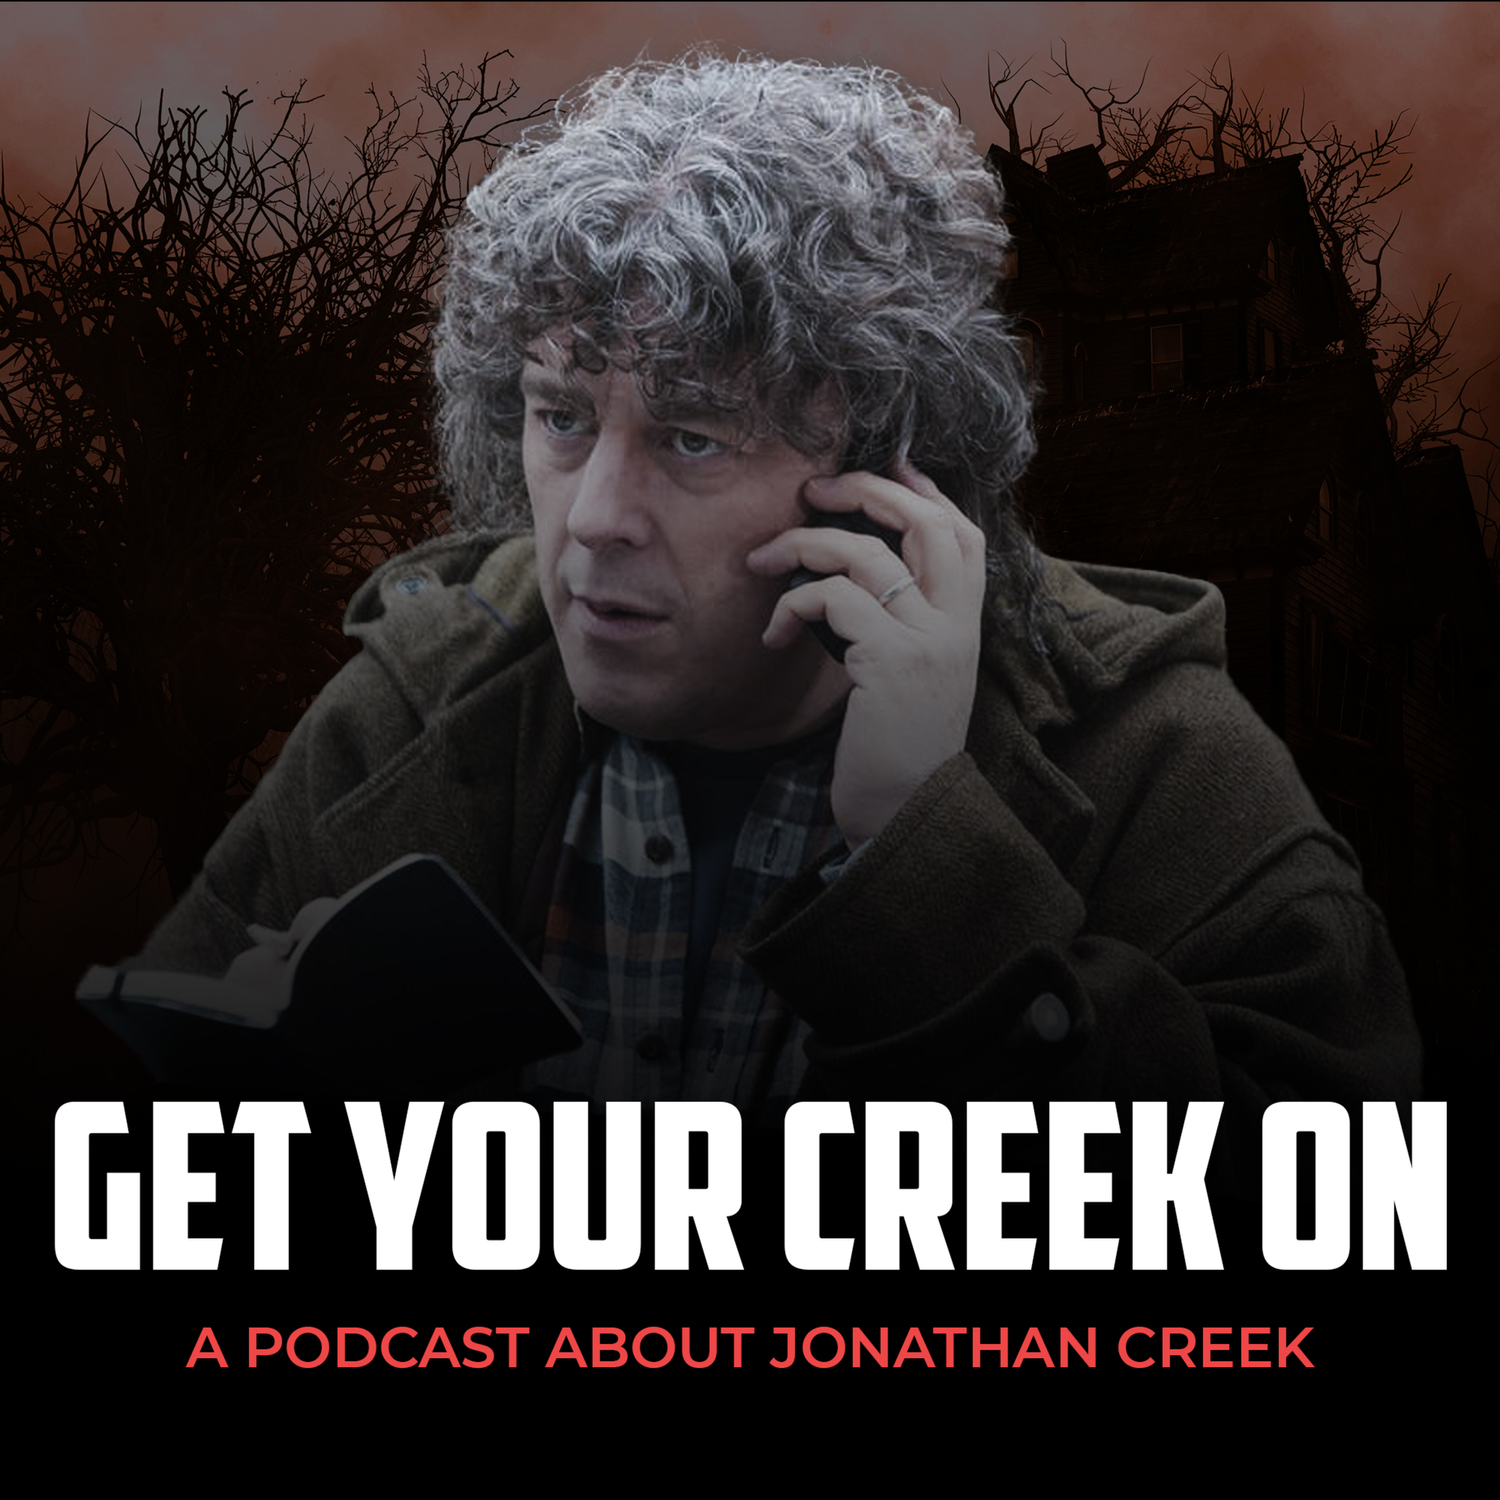 Get Your Creek On: A podcast about Jonathan Creek